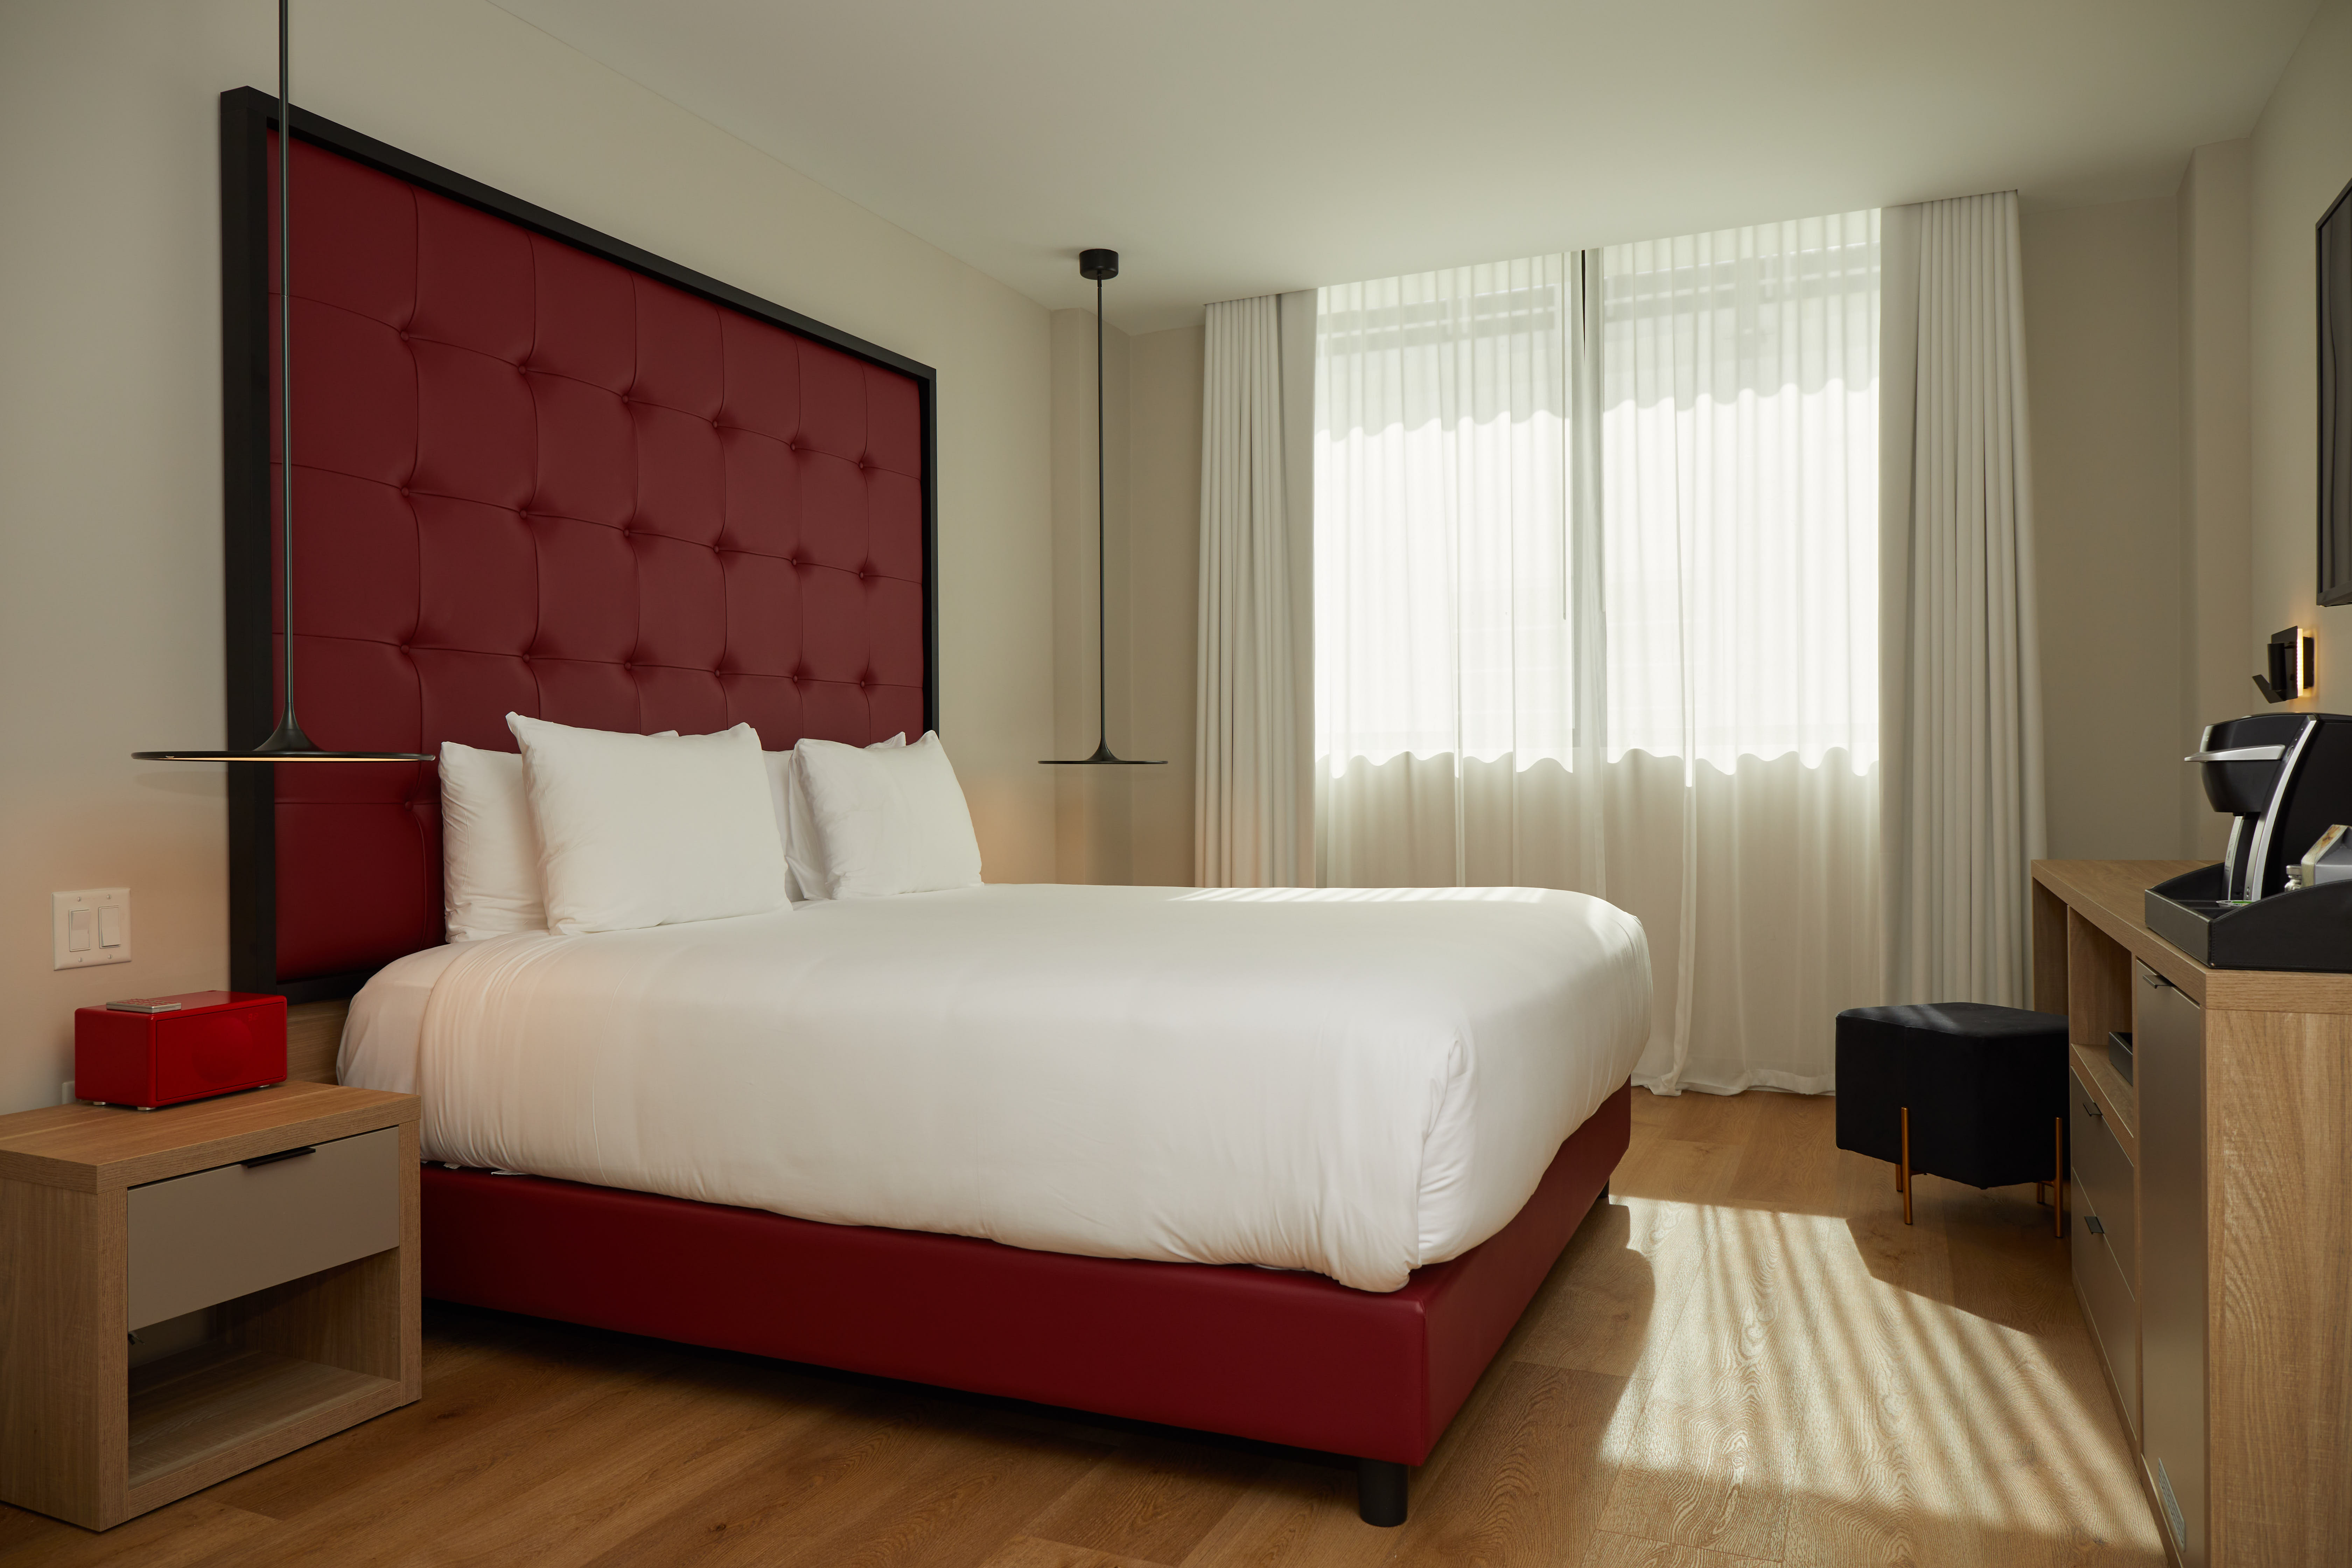 Image of a room with double bed